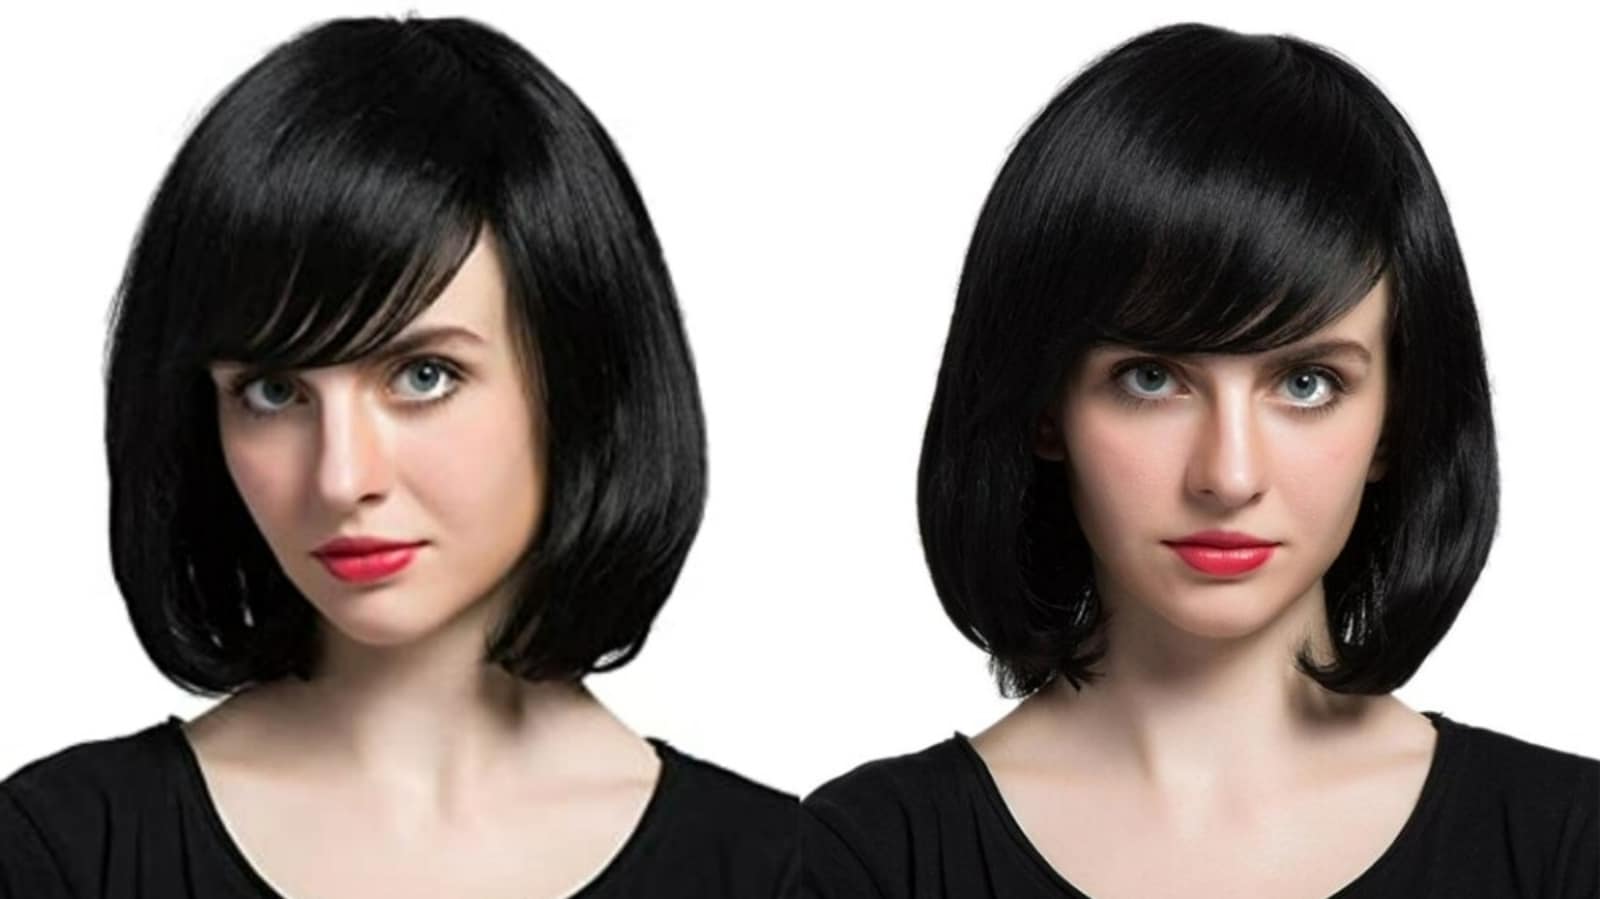 Hair wigs for women: Go for ones that fit snugly and are of good quality